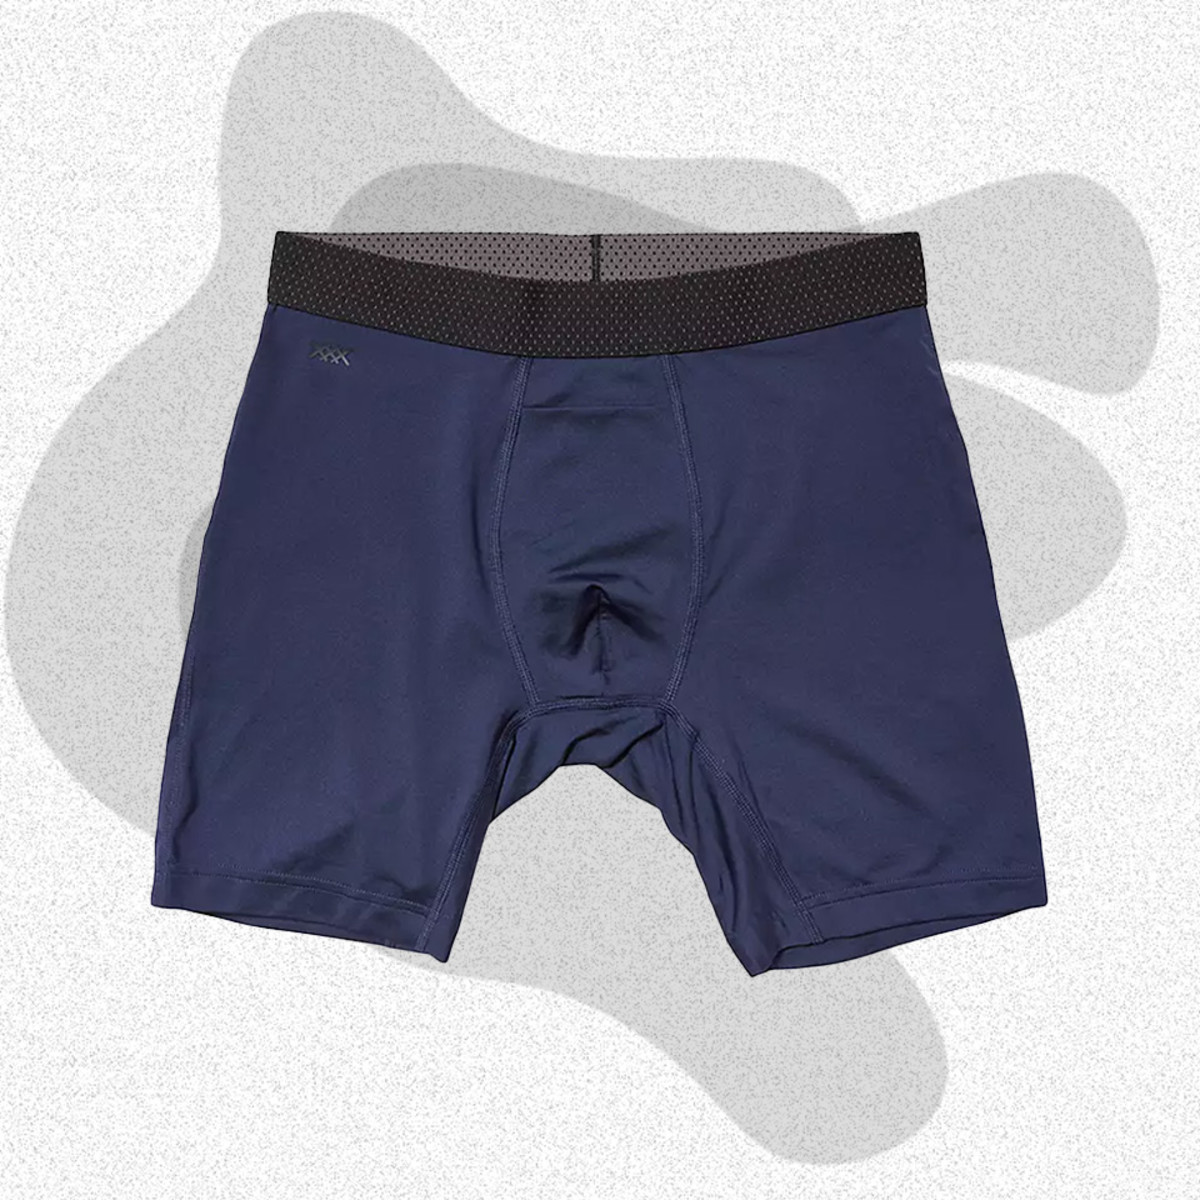 Saxx Underwear Co. Droptemp Cooling Sleep Loose Boxer Fly in Blue